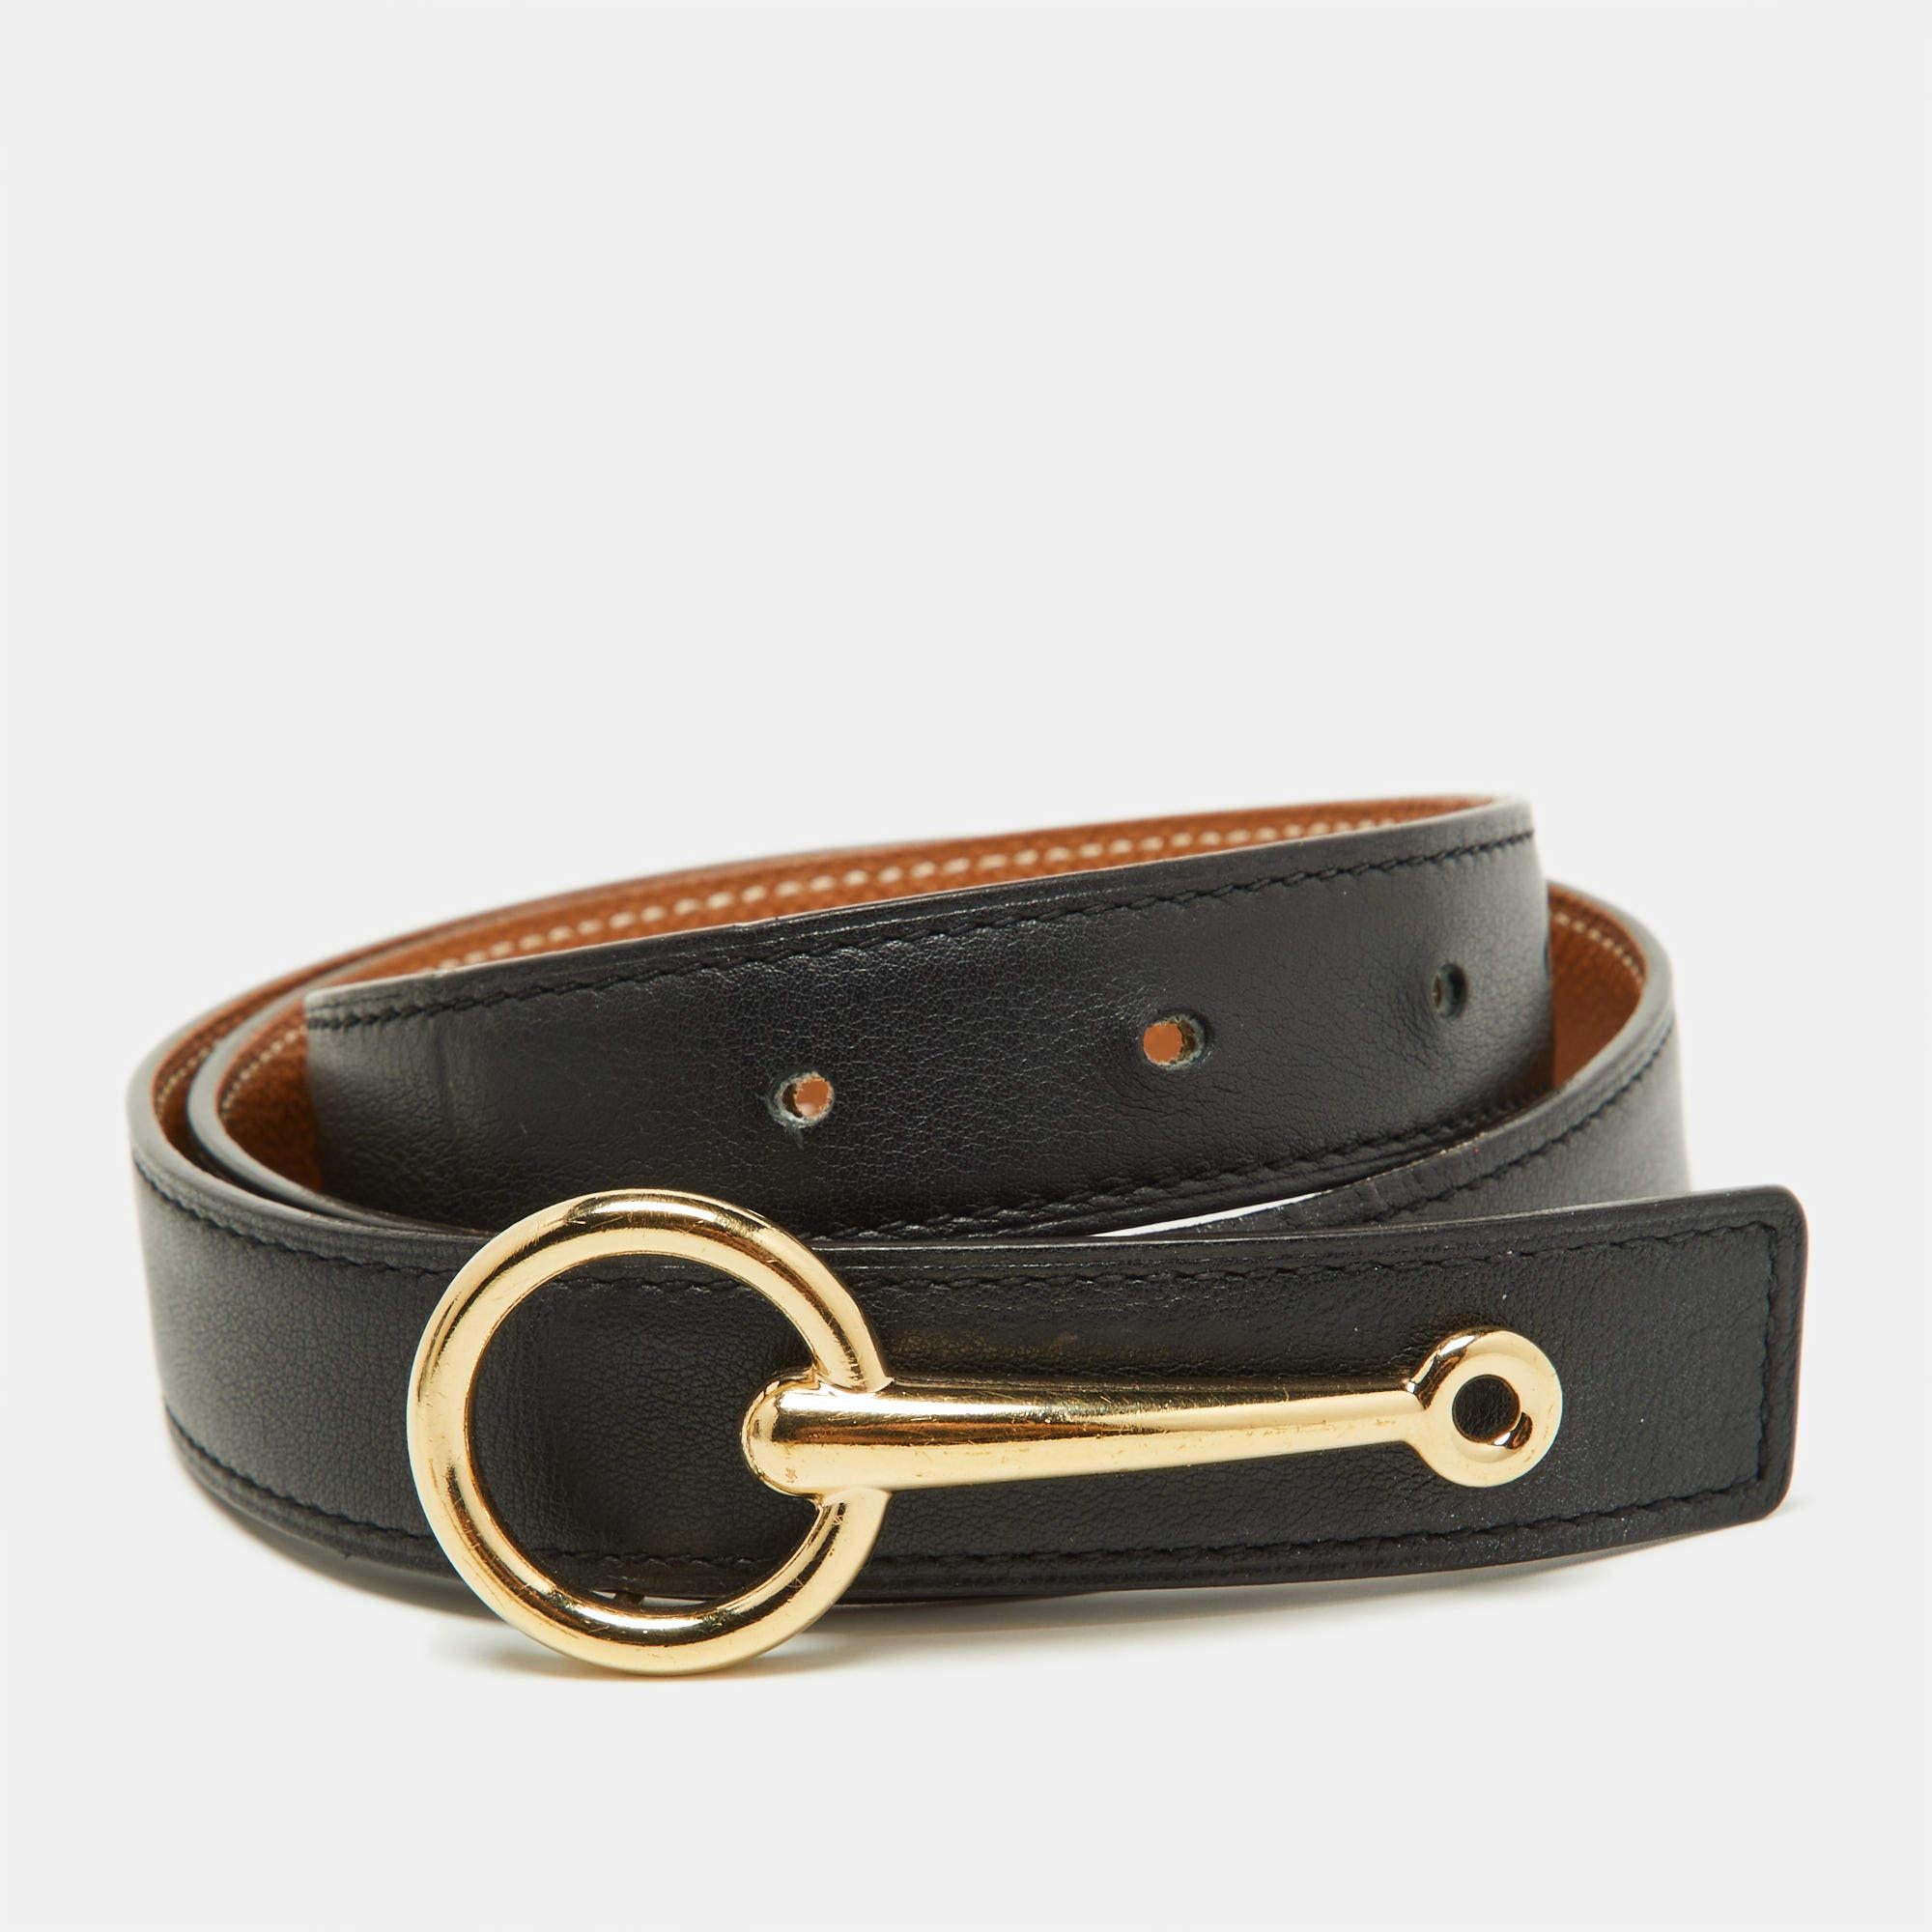 The Hermes Mors buckle belt is a luxurious accessory crafted from premium materials. It features a distinctive buckle, symbolizing Hermes' elegance and sophistication. This timeless belt effortlessly enhances any outfit, making it a coveted choice